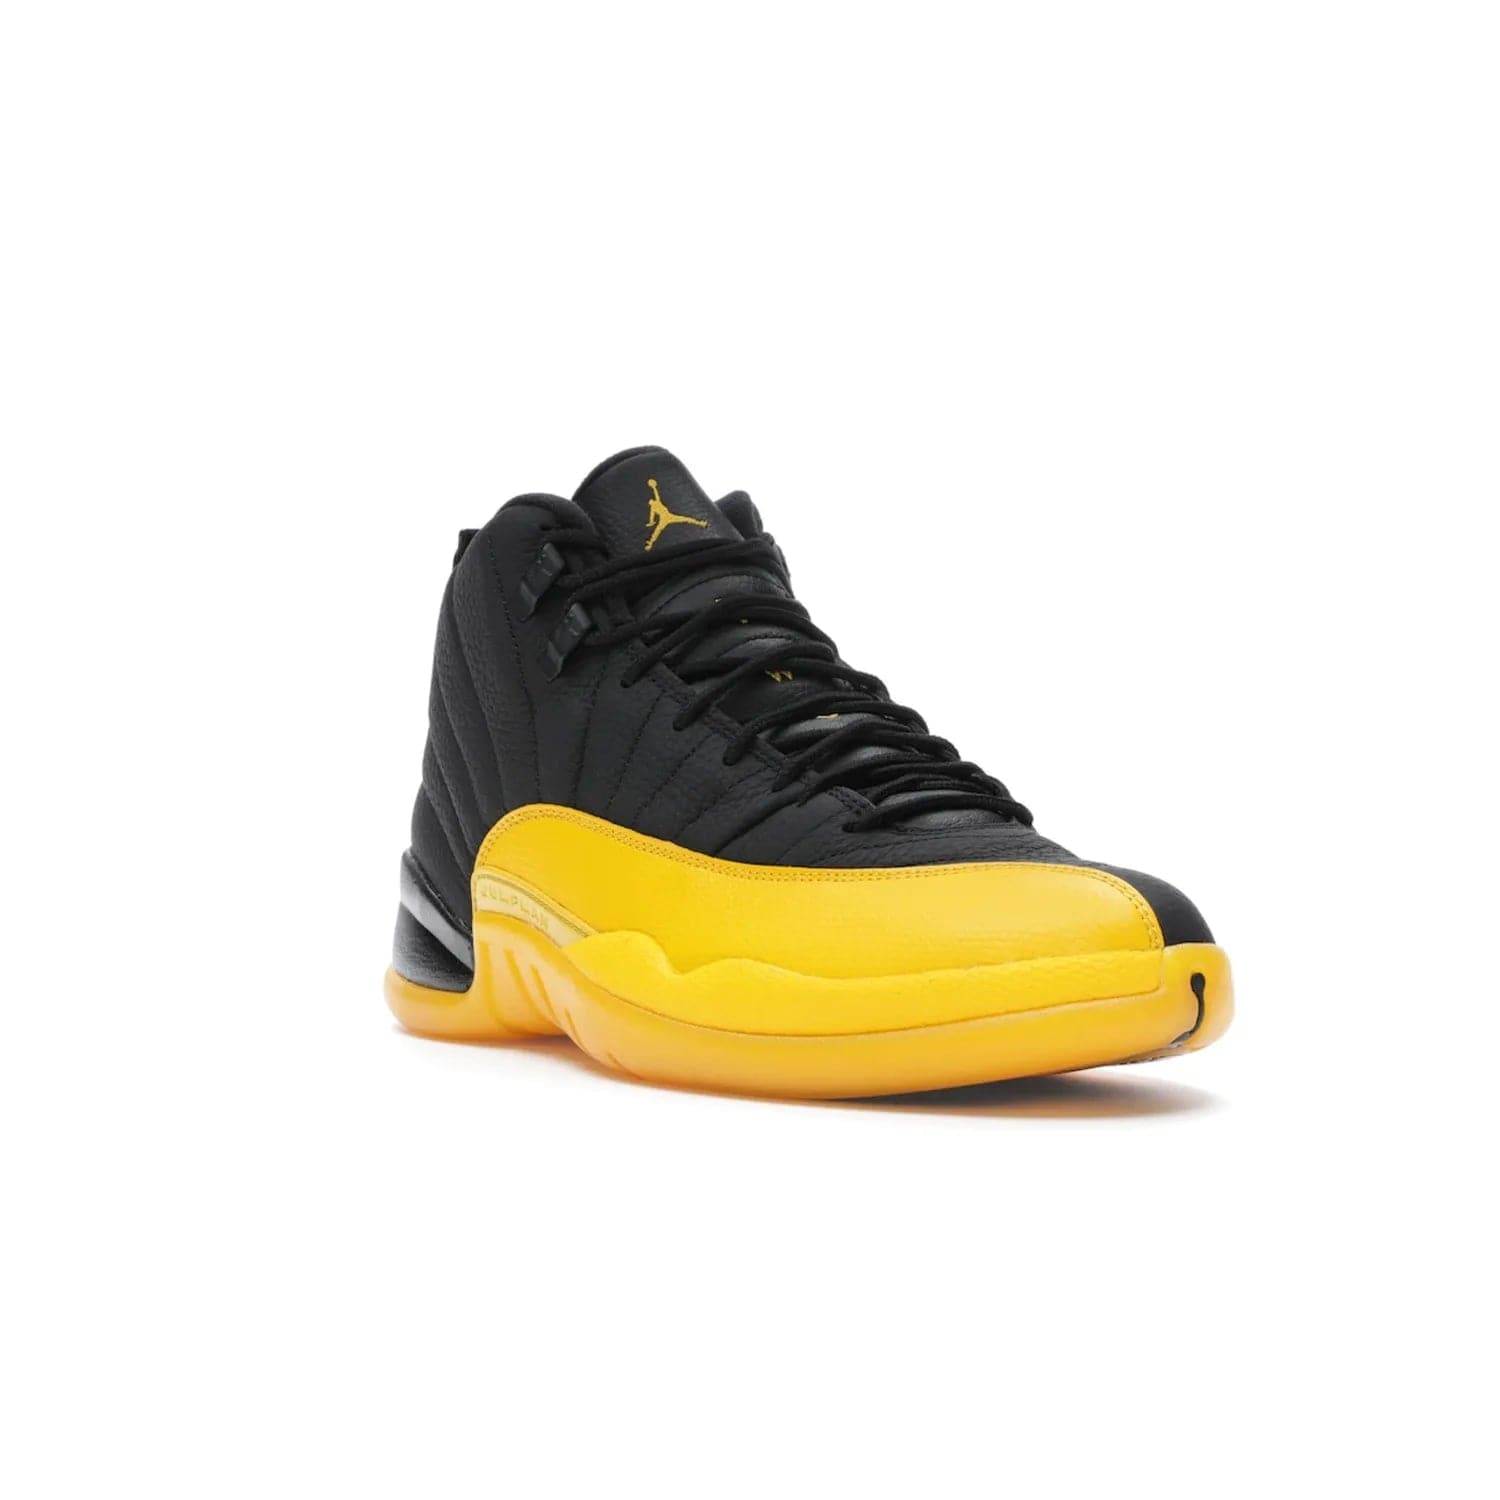 Jordan 12 Retro Black University Gold - Image 6 - Only at www.BallersClubKickz.com - This Jordan 12 Retro features a black tumbled leather upper and University Gold accents for a modern twist. Boasting Jordan "Two Three" branding and a yellow sole, these shoes will elevate your wardrobe. Fresh, sleek, and one of a kind - the Jordan 12 University Gold is your summer sneaker.